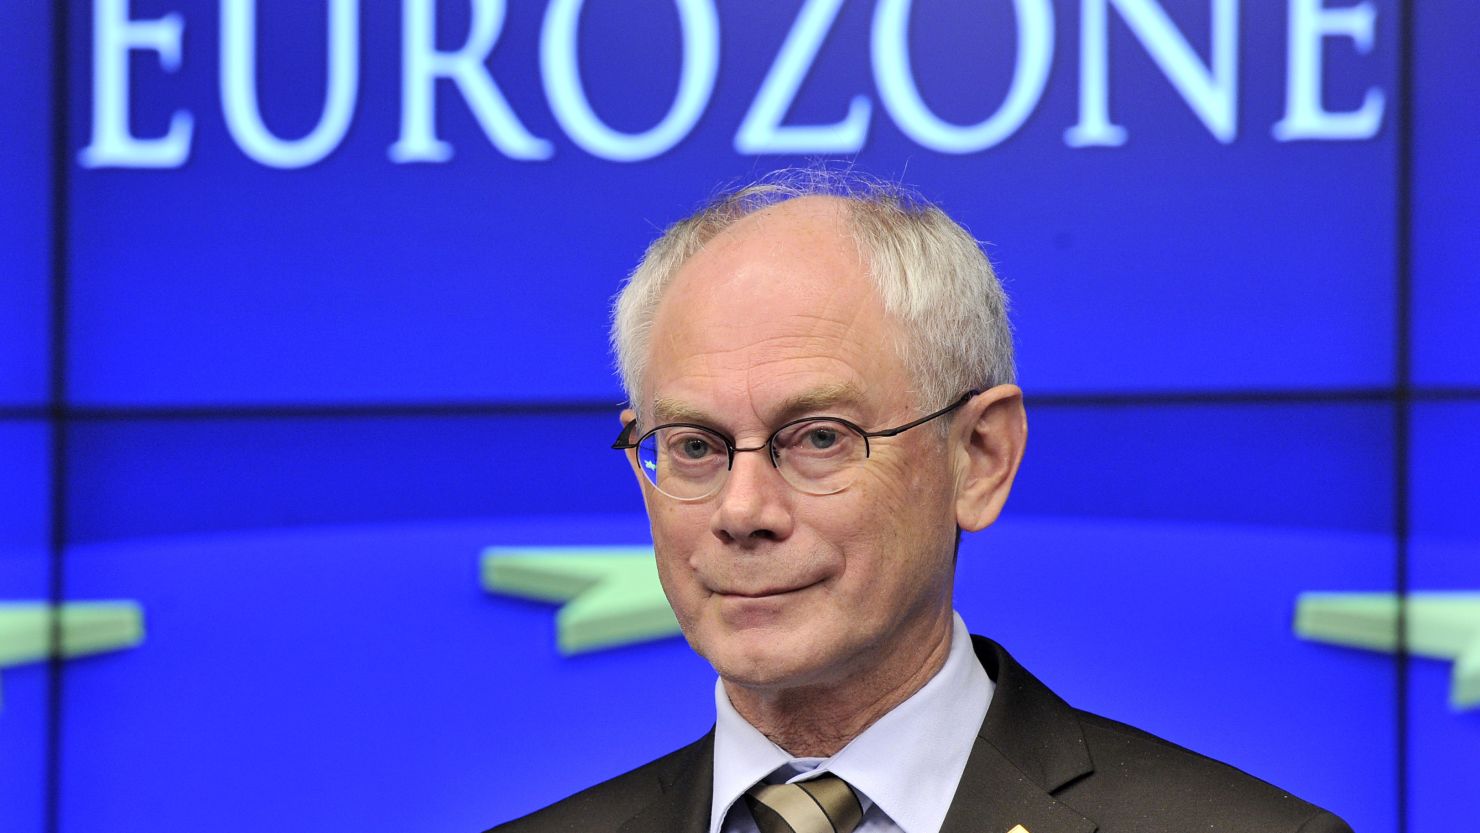 Herman Van Rompuy's memo singled out "member states that ... have consistently failed to meet the conditionality" of their relief.